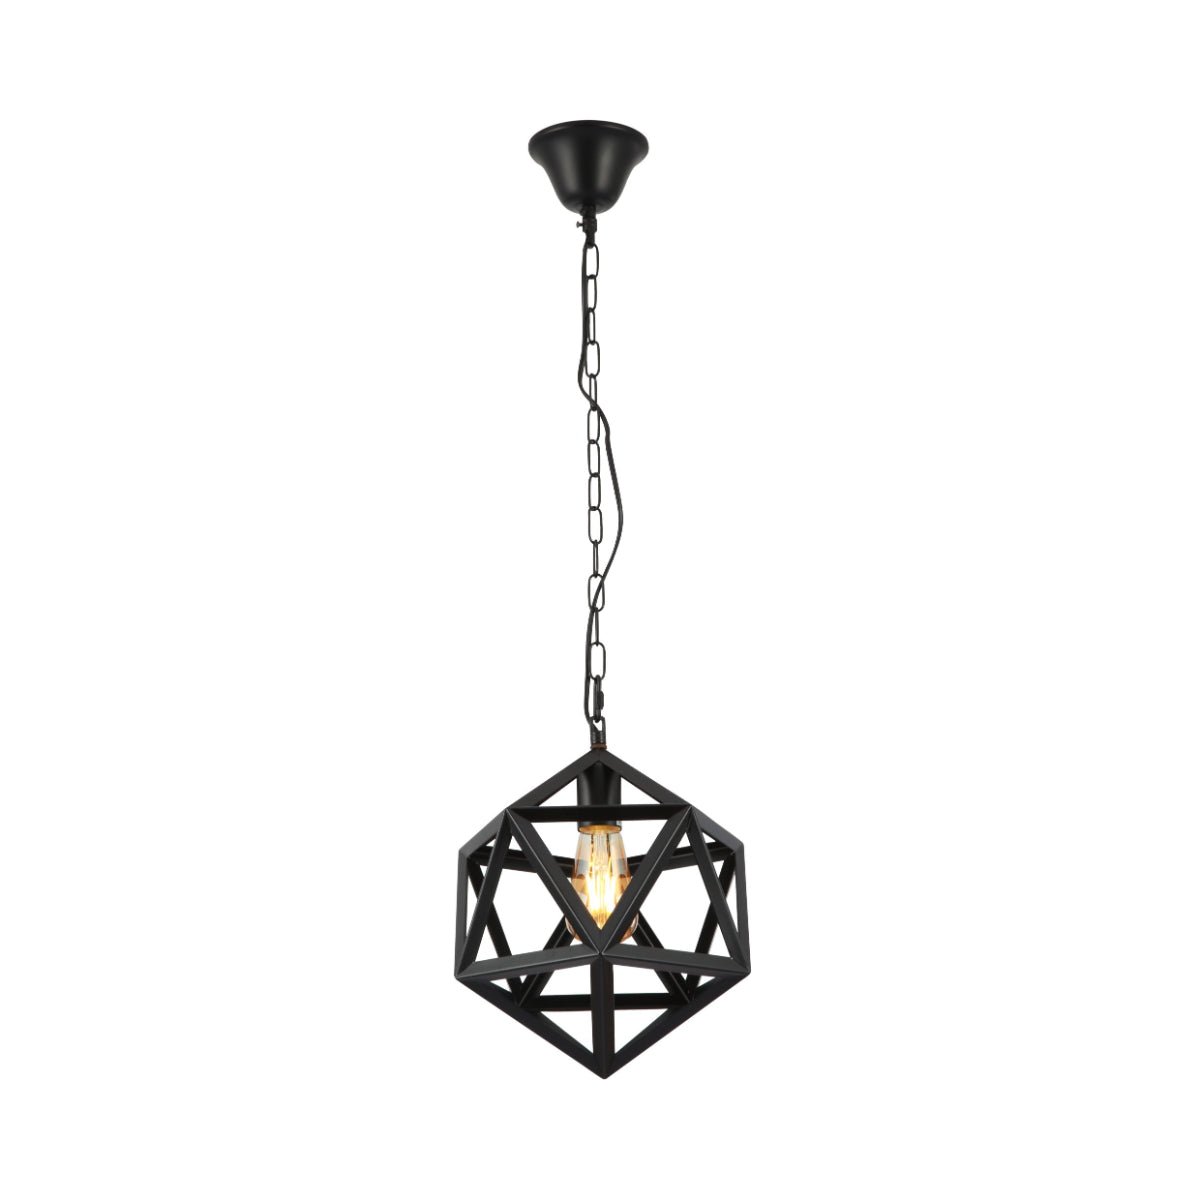 Main image of Black Metal Cage Polyhedral Pendant Ceiling Light with E27 | TEKLED 150-17834